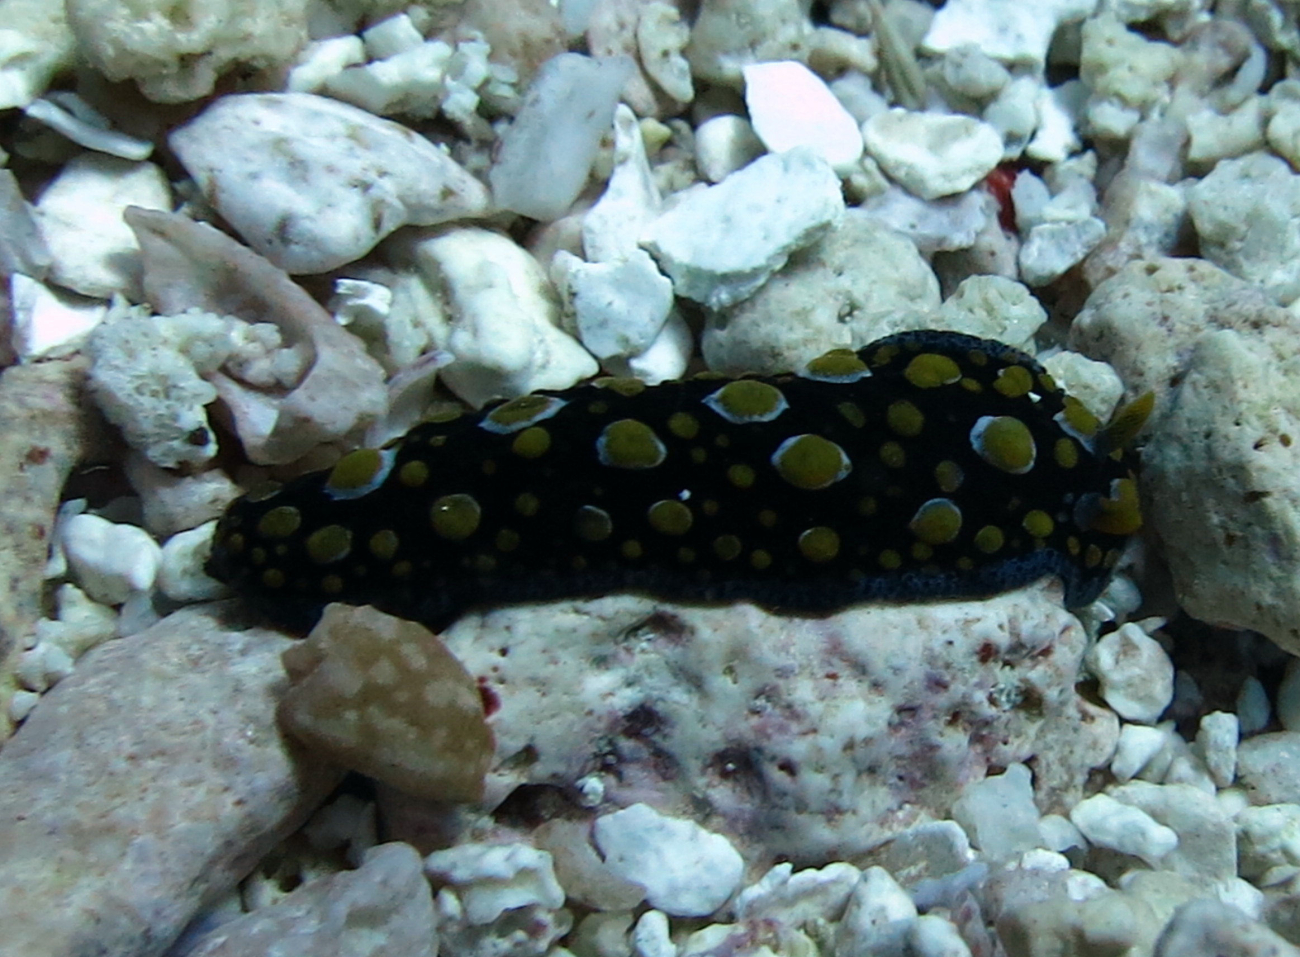 A yellow, black, and white nudibranch